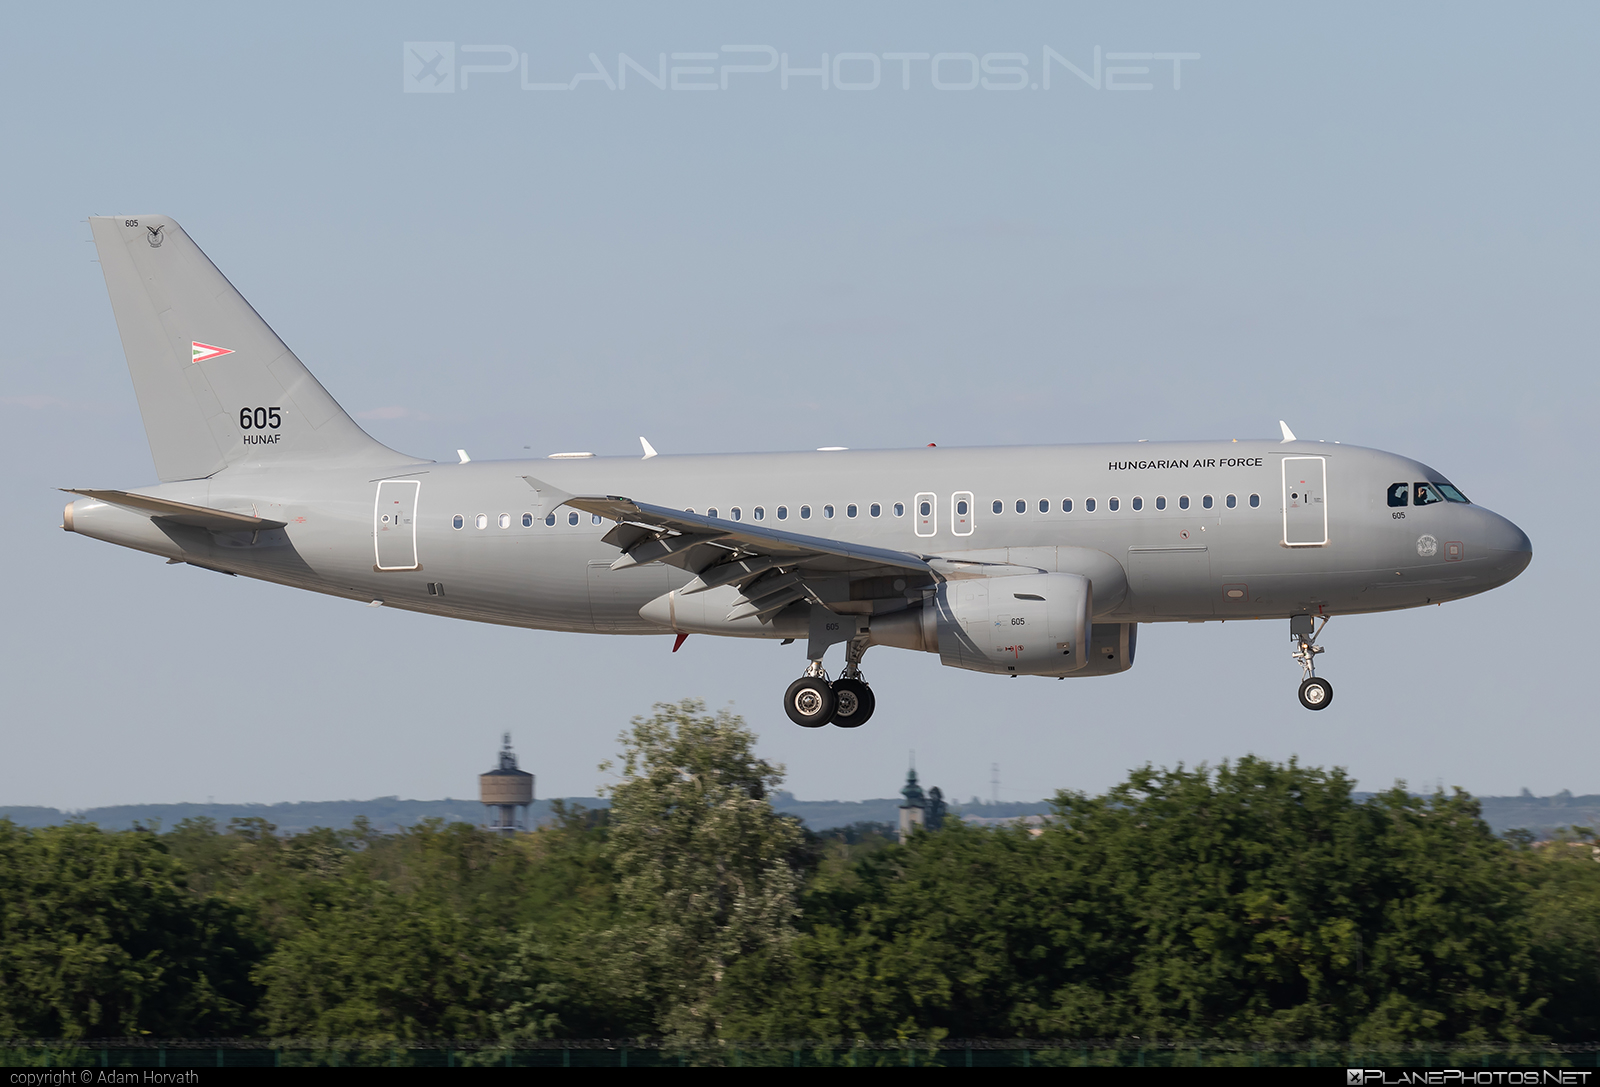 Airbus A319-112 - 605 operated by Magyar Légierő (Hungarian Air Force) #a319 #a320family #airbus #airbus319 #hungarianairforce #magyarlegiero